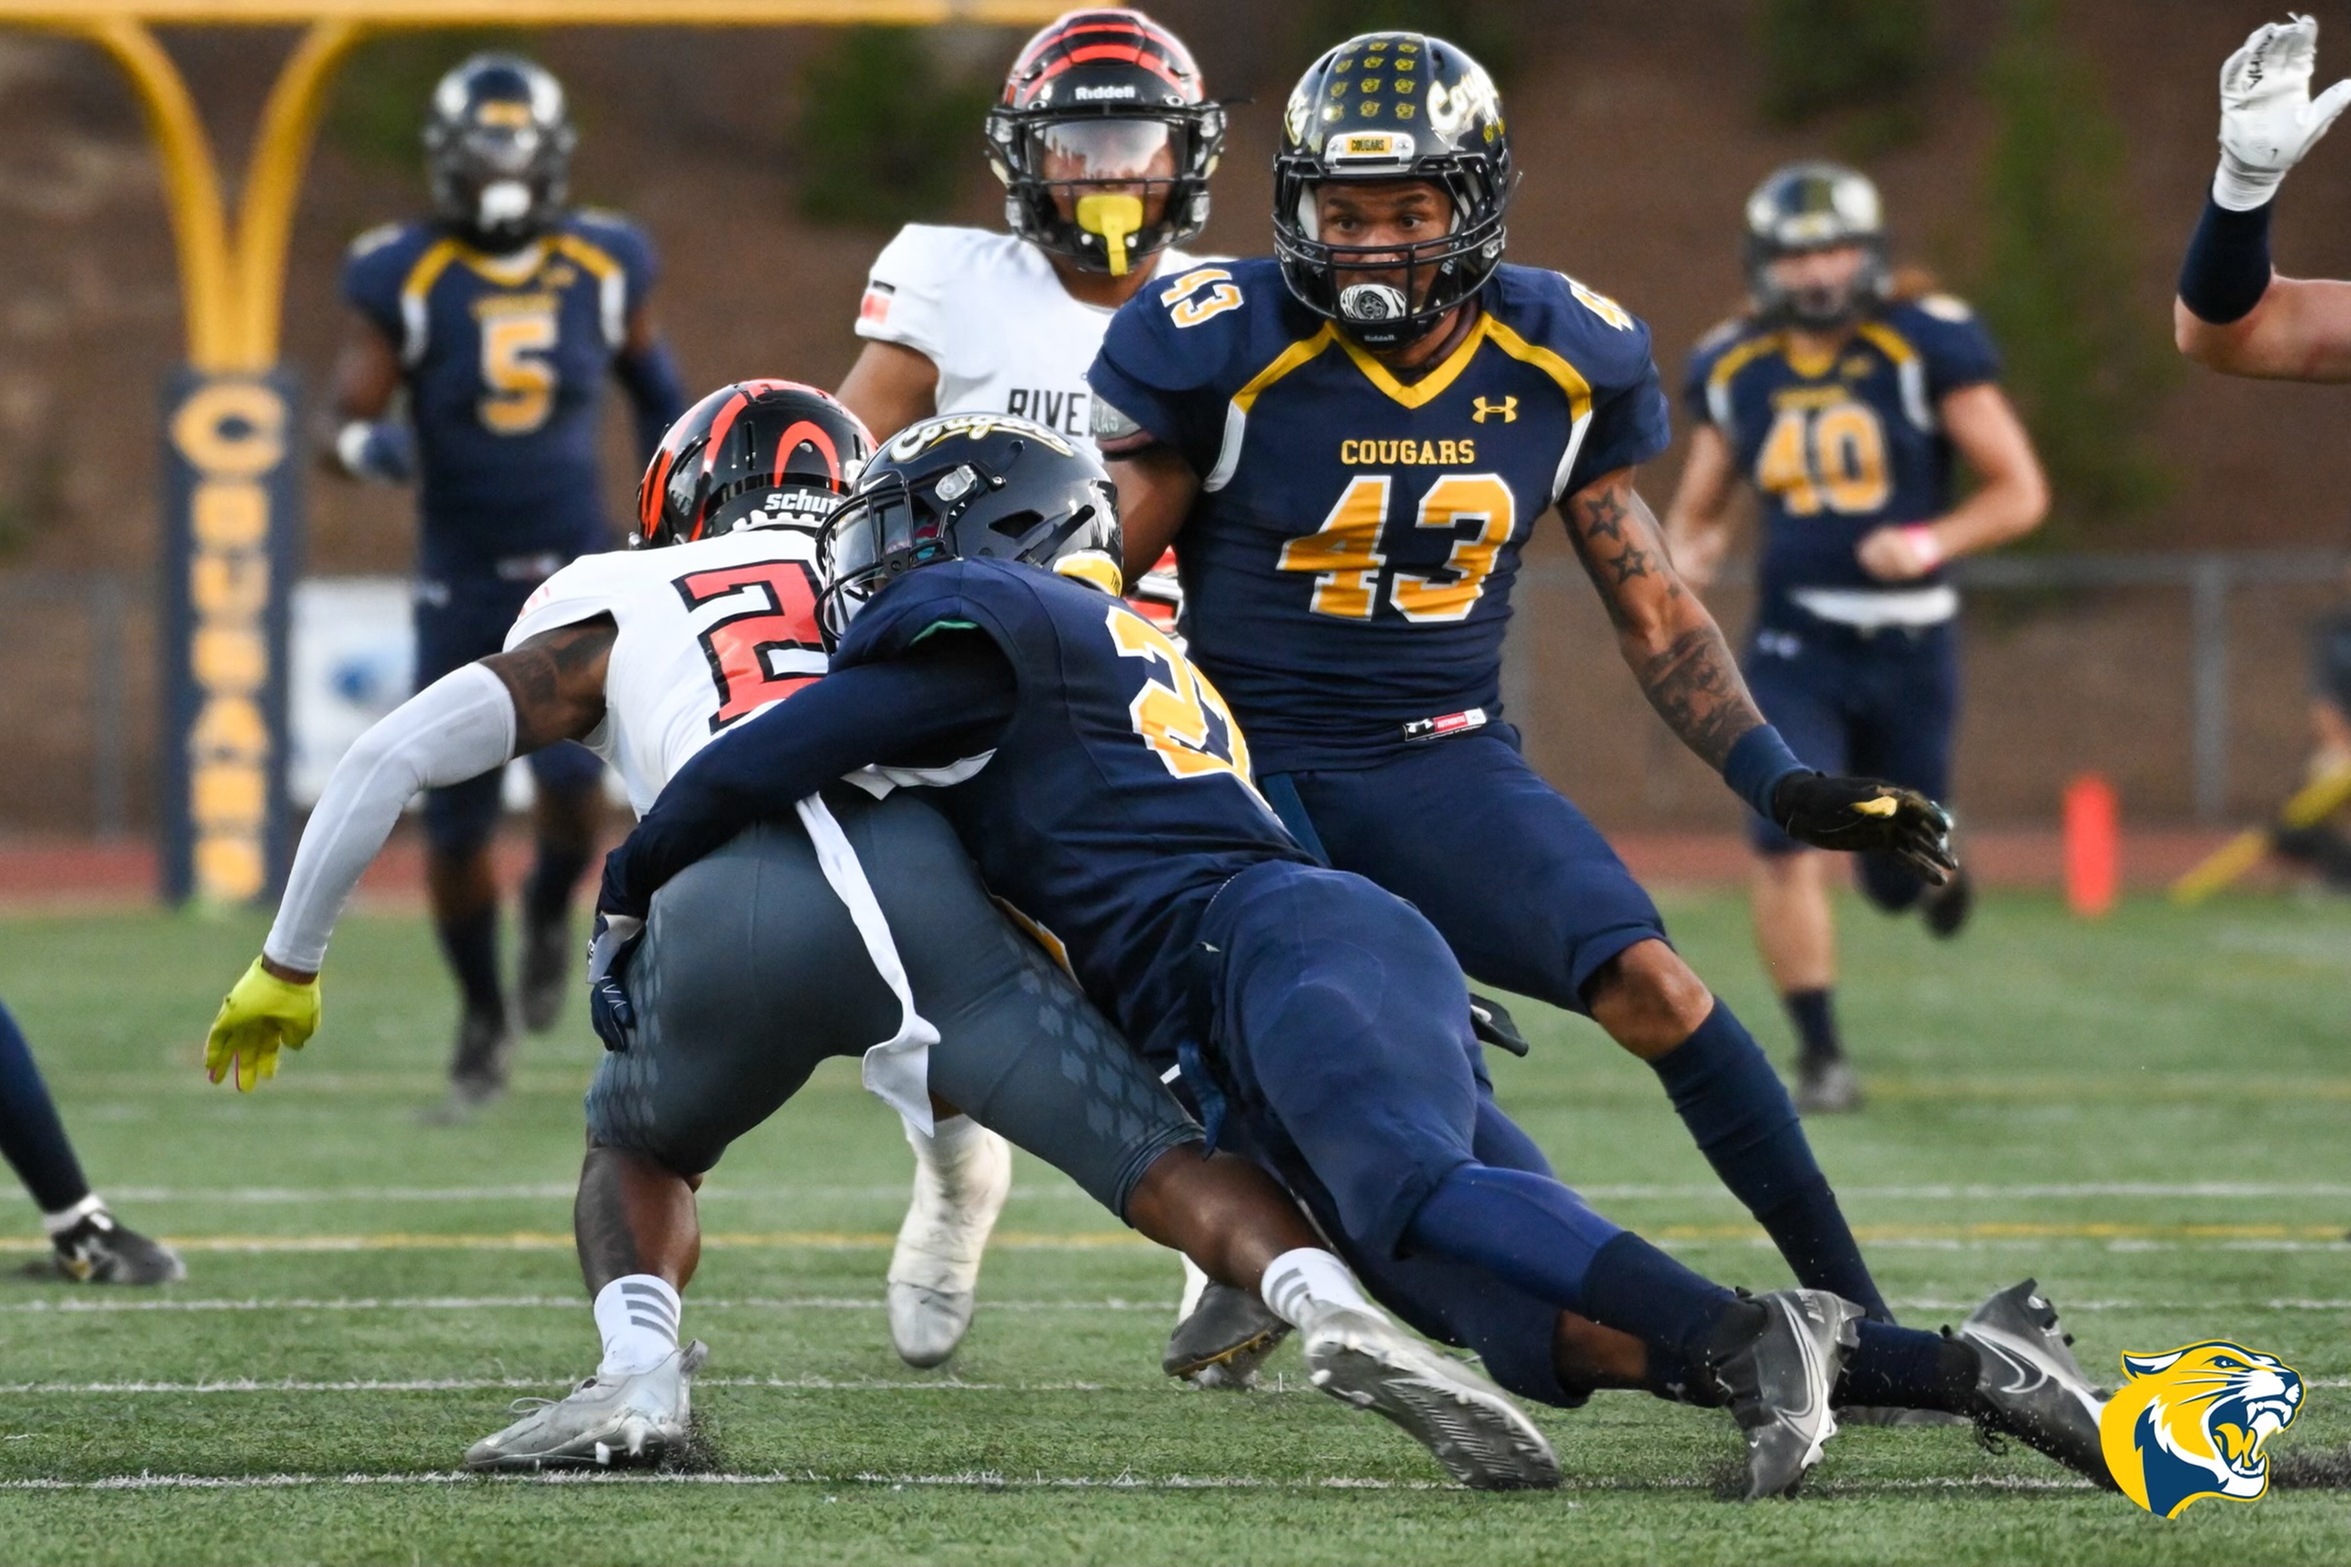 College of the Canyons defensive back Joshua Christopher (27) wraps of the Riverside City College ball carrier as teammate Jeremiah Cox (43) readies to pounce during the the No. 4 Cougars' 41-24 victory over No. 7 Riverside City College on Saturday. ?Dylan Stewart/1550 Sports